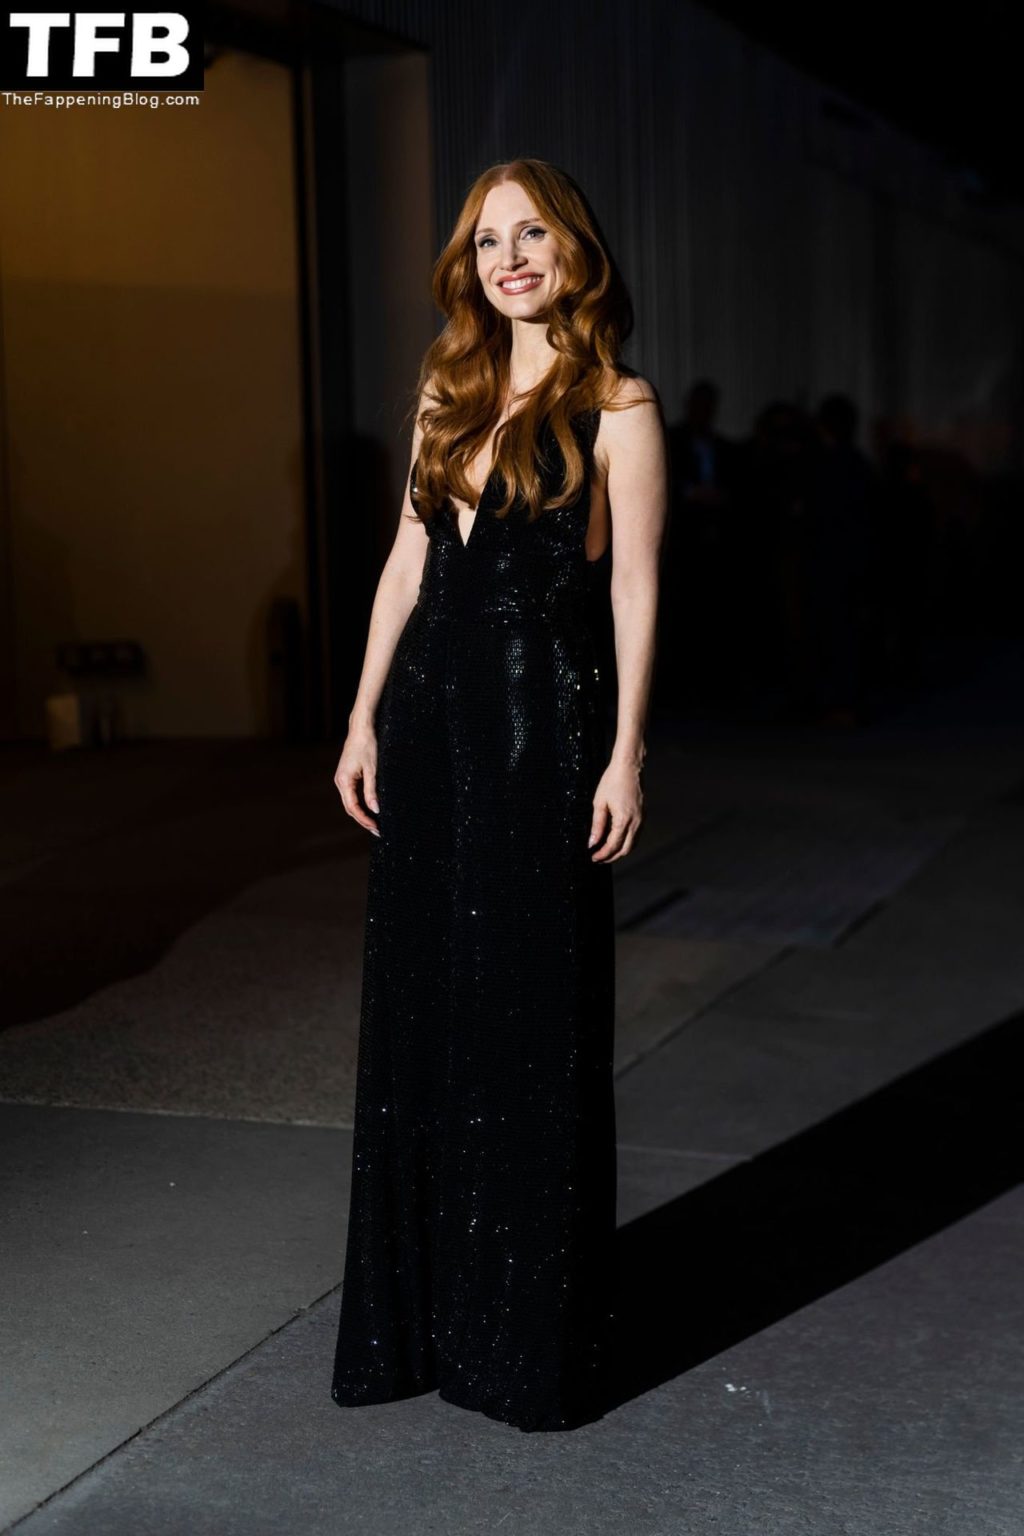 Jessica Chastain Sexy The Fappening Blog 27 1024x1536 - Jessica Chastain Looks Hot at the Ralph Lauren Fall 2022 Fashion Show in NYC (68 Photos)